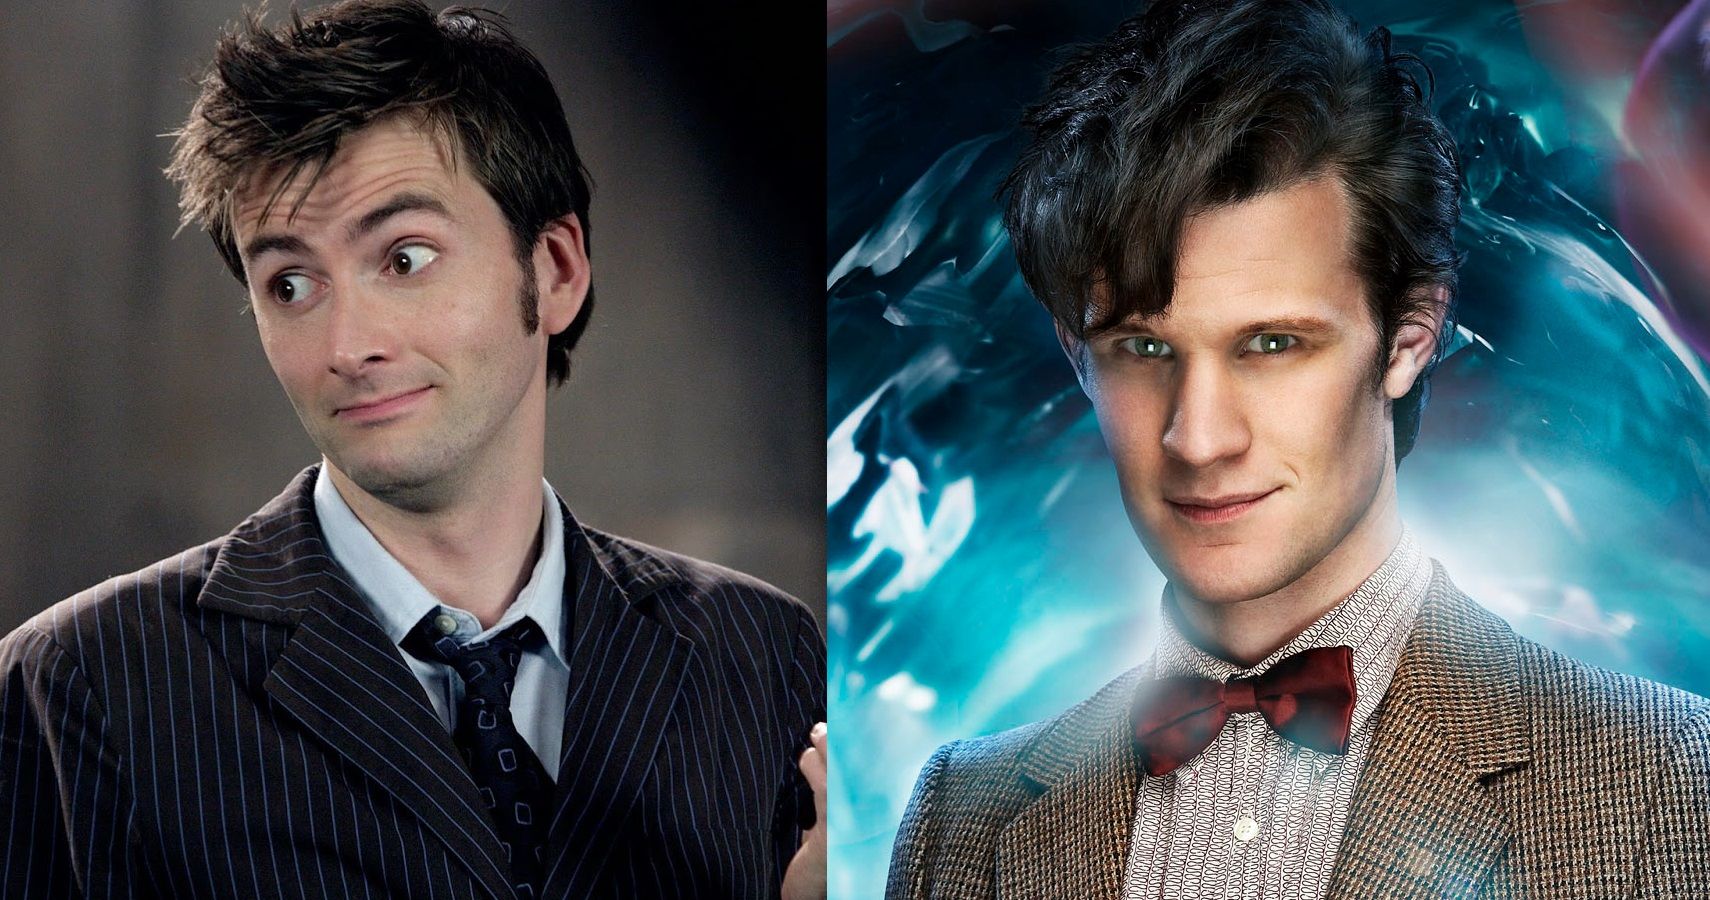 10th vs 11th doctor featured image